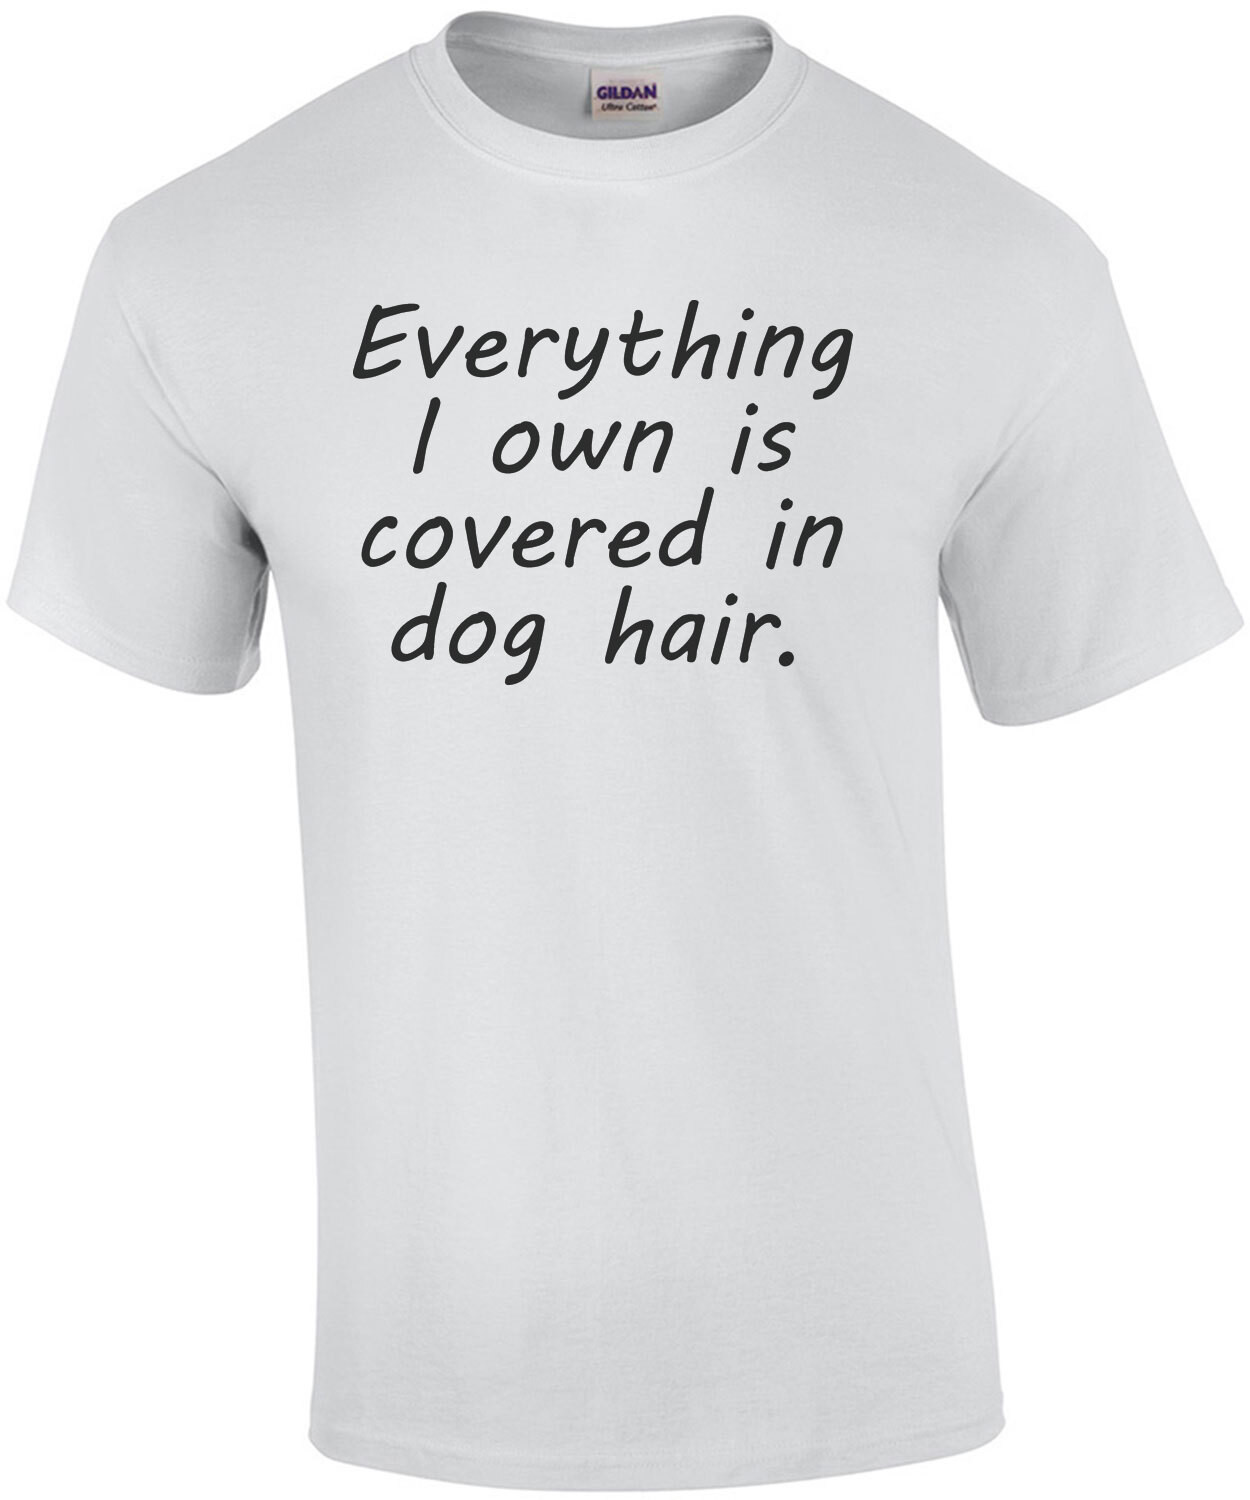 Everything I own is covered in dog hair. Funny dog t-shirt